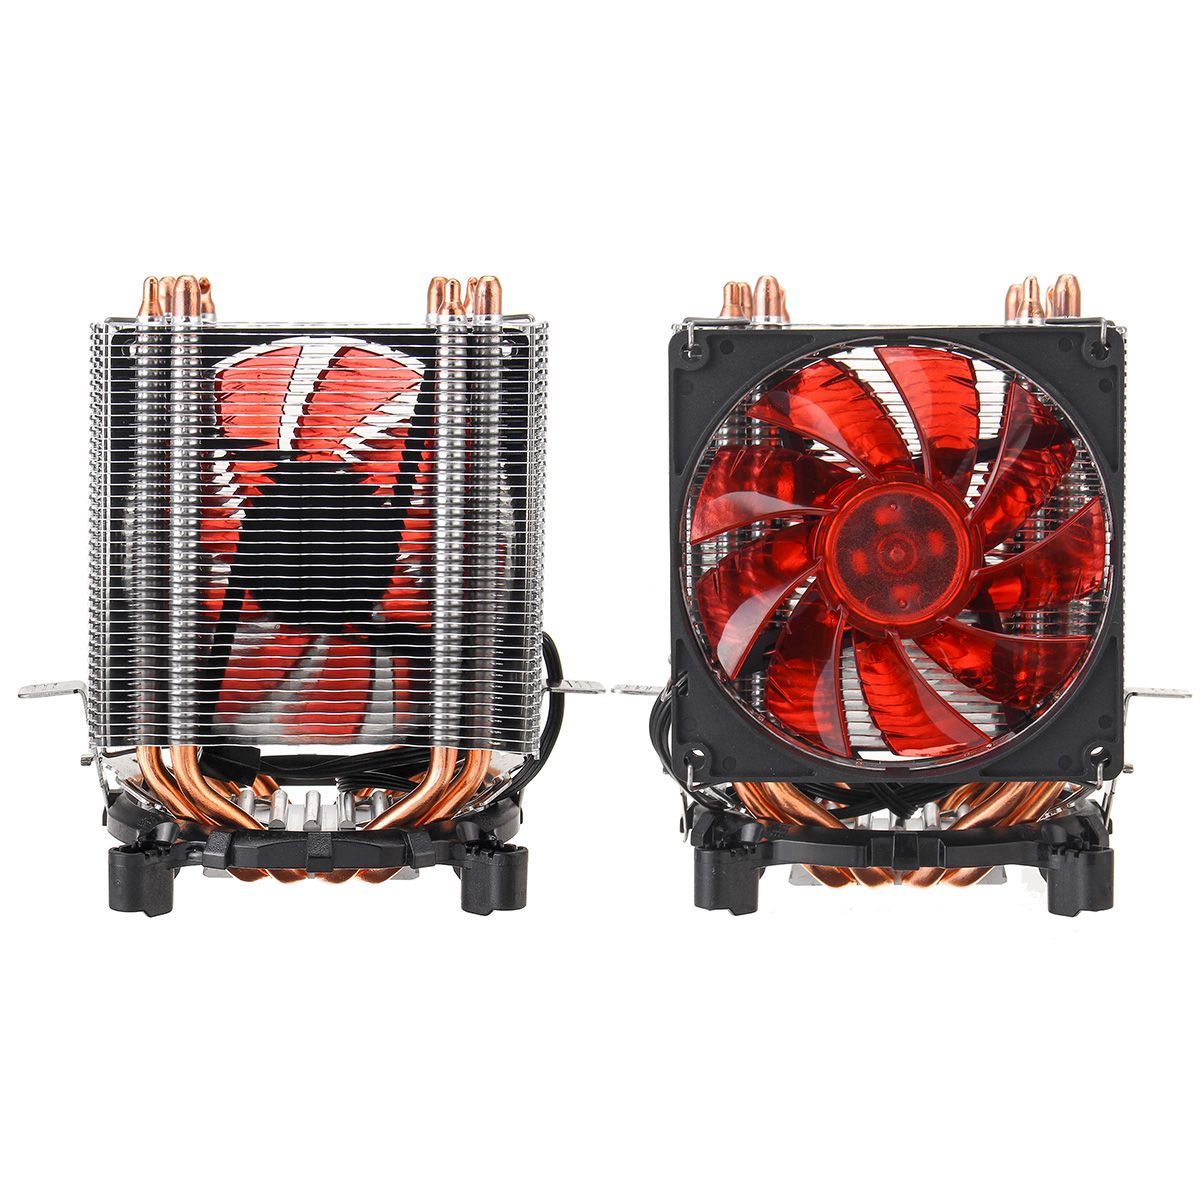 3-Pin-Four-Copper-Pipes-Red-Backlit-CPU-Cooling-Fan-for-Intel-1155-1156-AMD-1431789